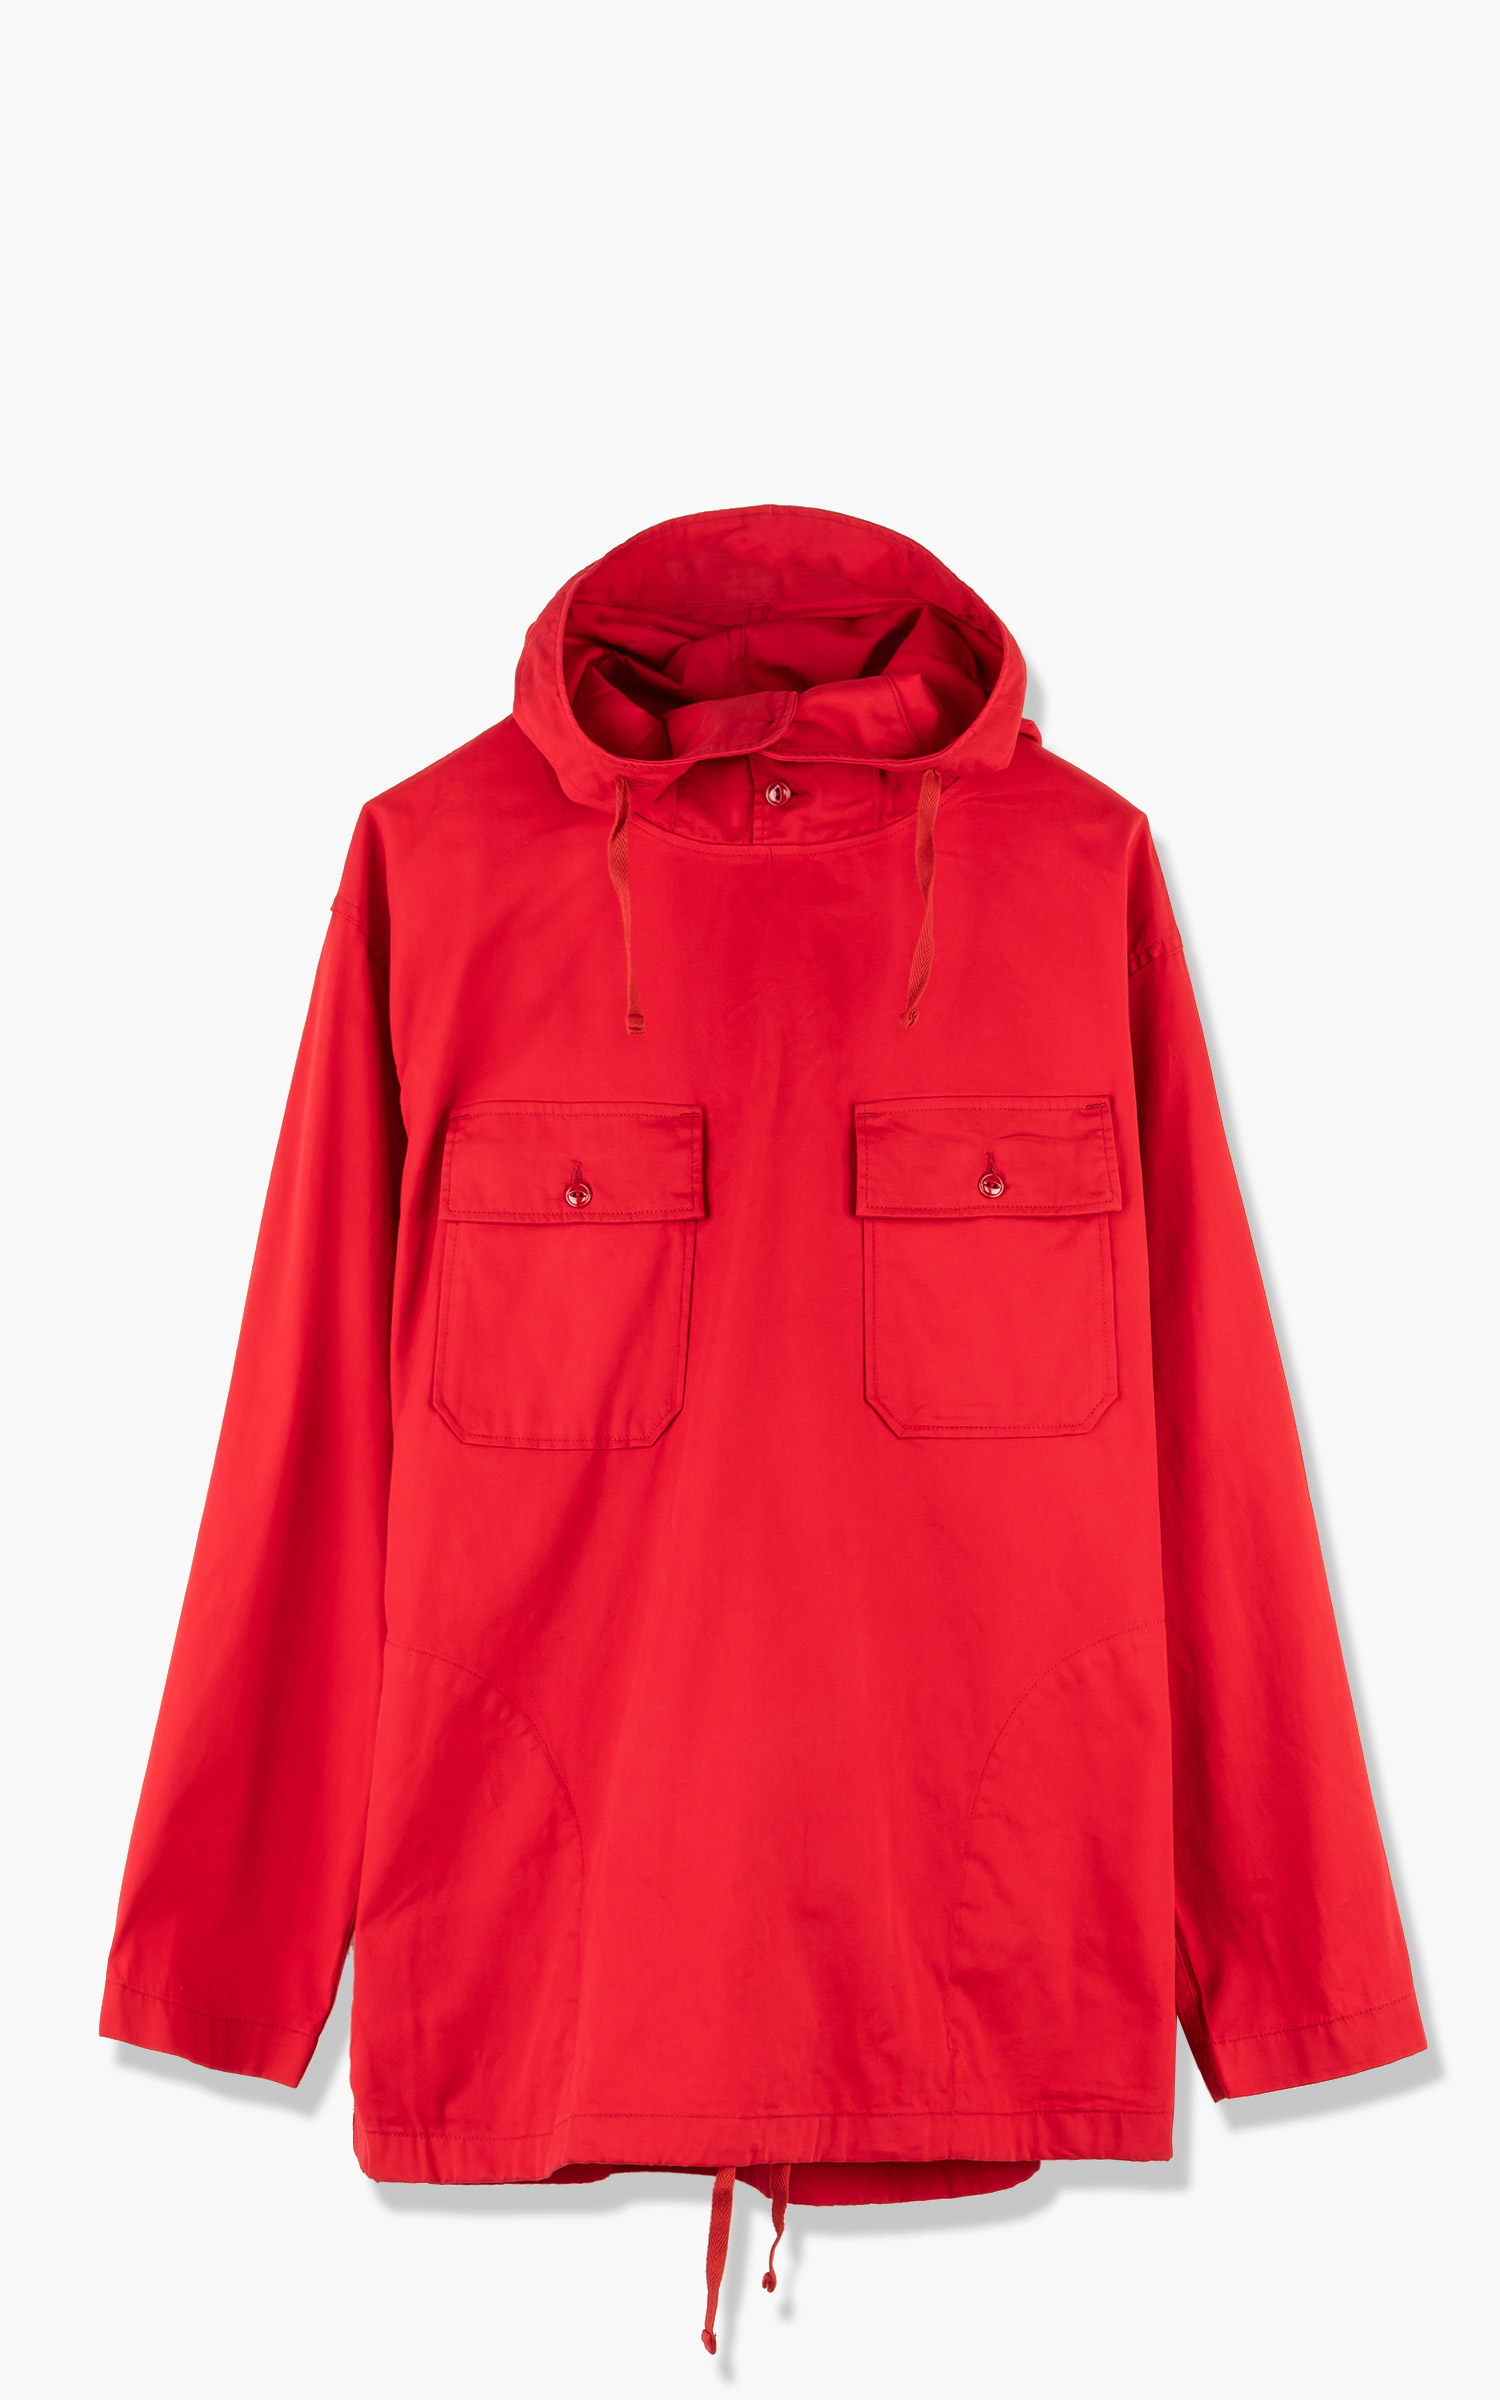 Engineered Garments Cagoule Shirt Red Cotton Micro Sanded Twill | Cultizm